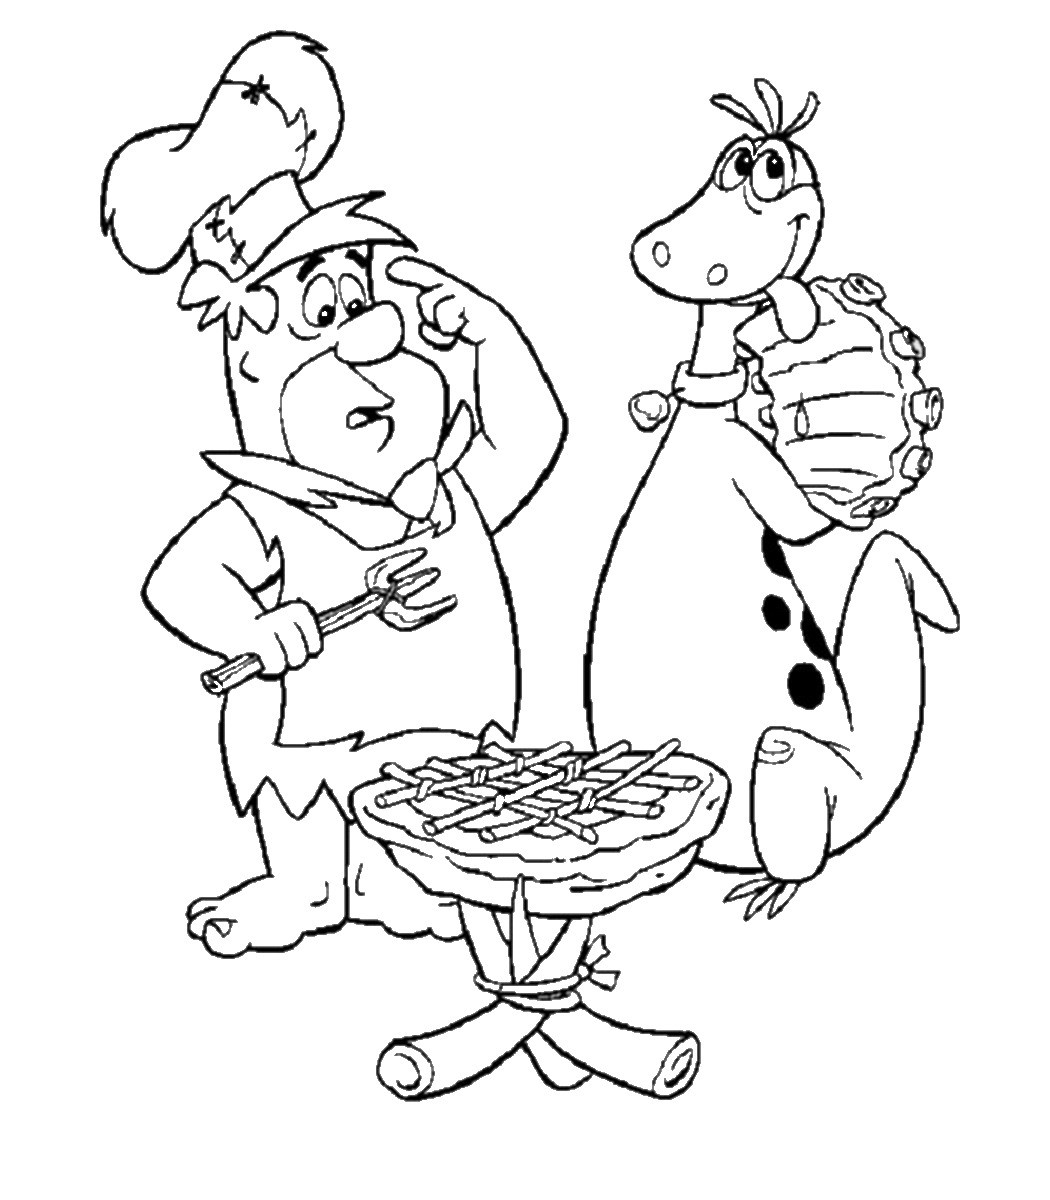 Coloring Sheet Free Printable
 The Flintstones Coloring Pages